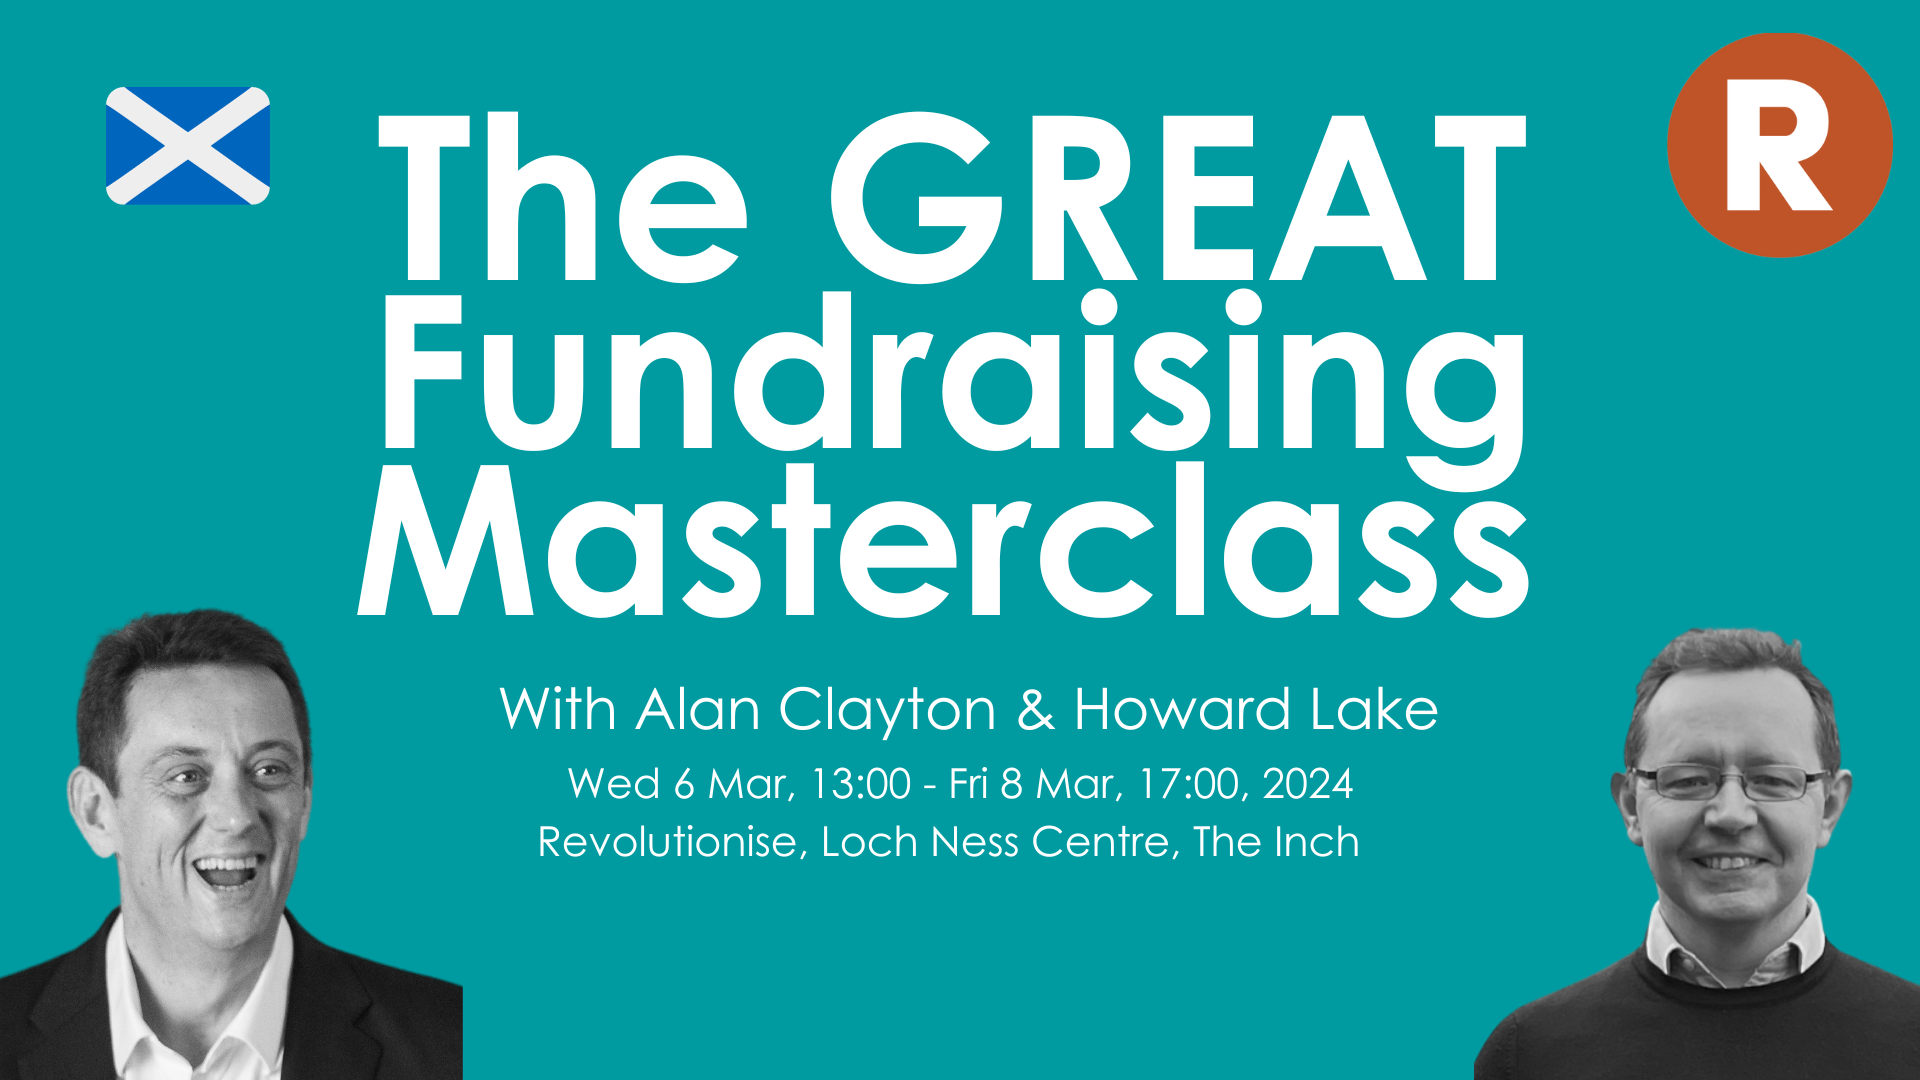 The Great Fundraising Masterclass - with Alan Clayton and Howard Lake